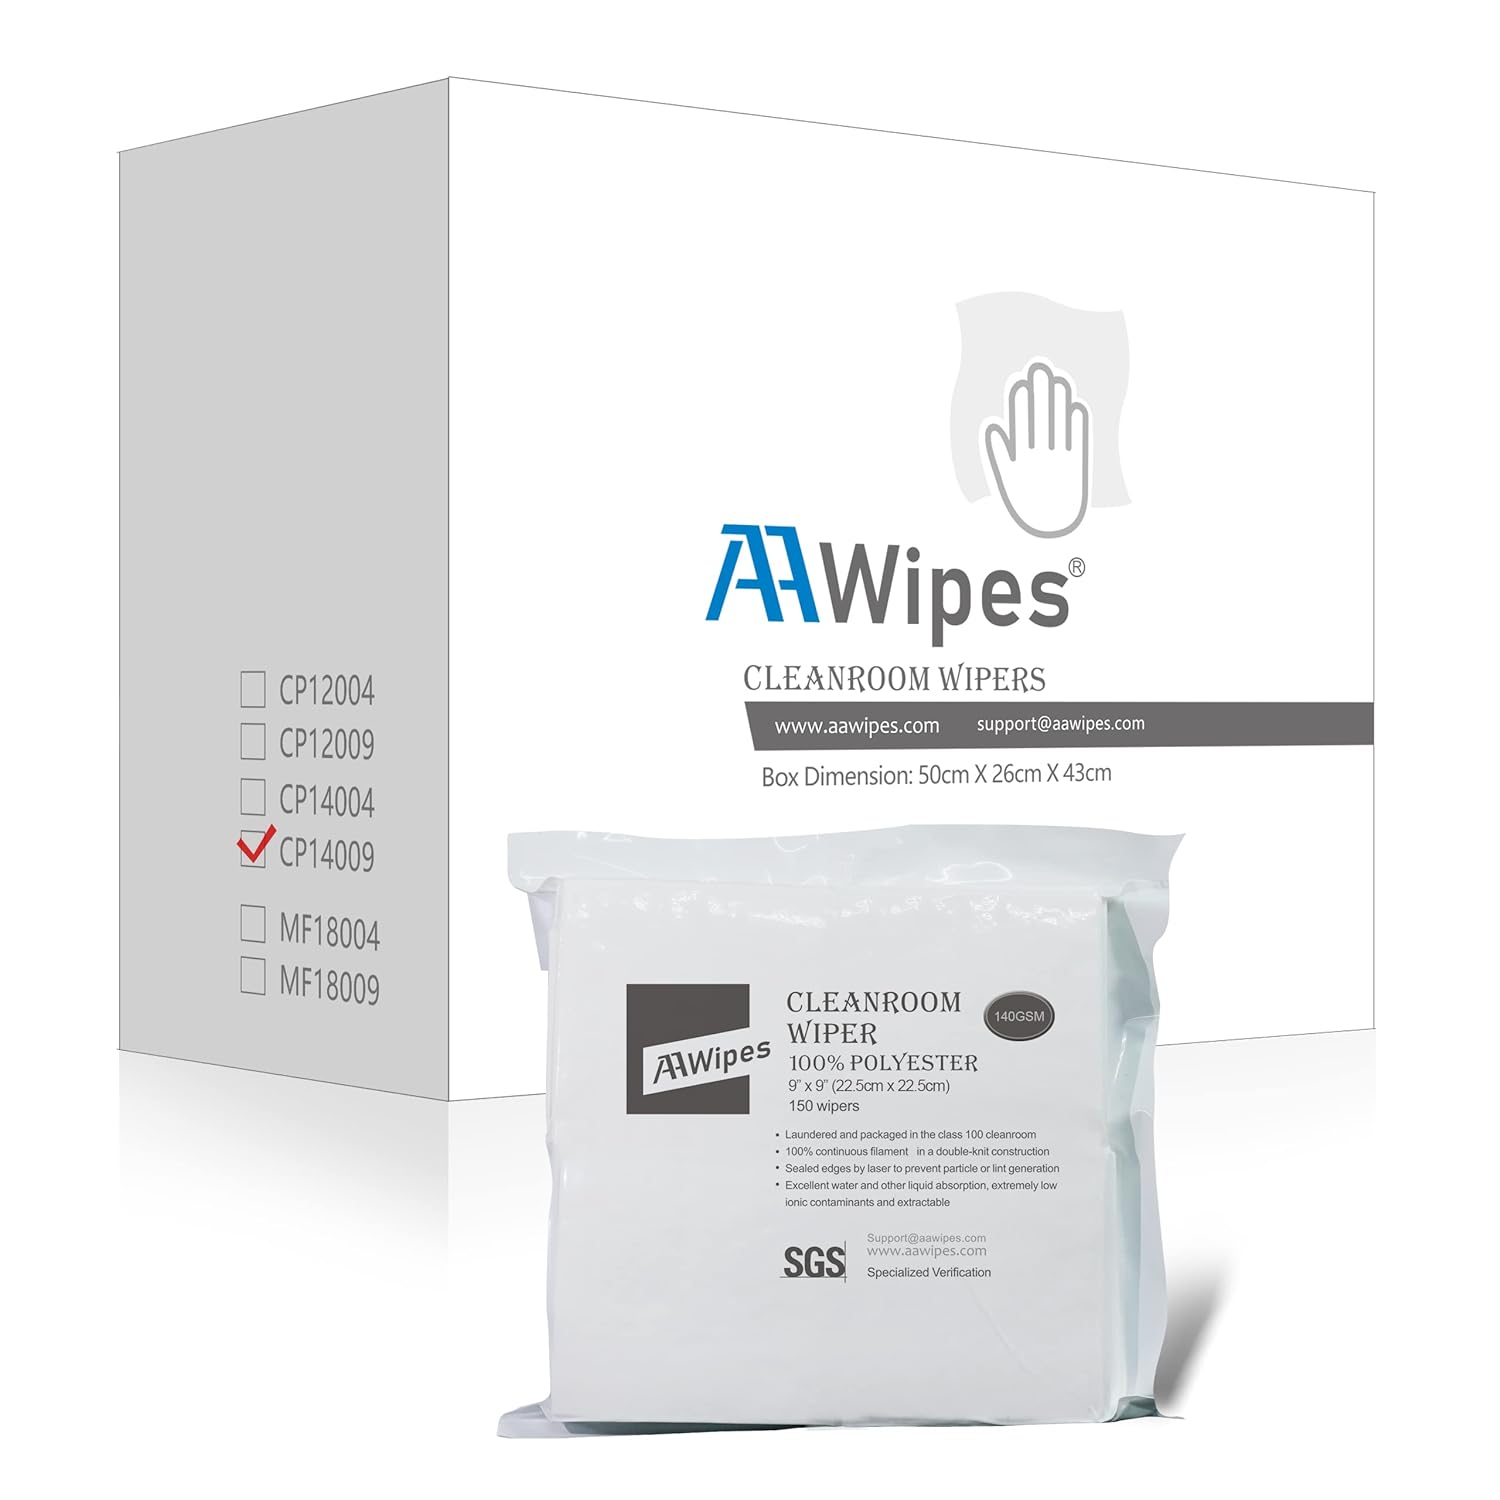 AAwipes Cleanroom Double Knit Class10-100 100% Polyester Wipers 9"x9"  (Starting at 1 Box with 2,100 Wipes per 14 Bags) (No. CP14009) Note: New Box Design with 1 Box of 14 Bags NOT 12 Bags